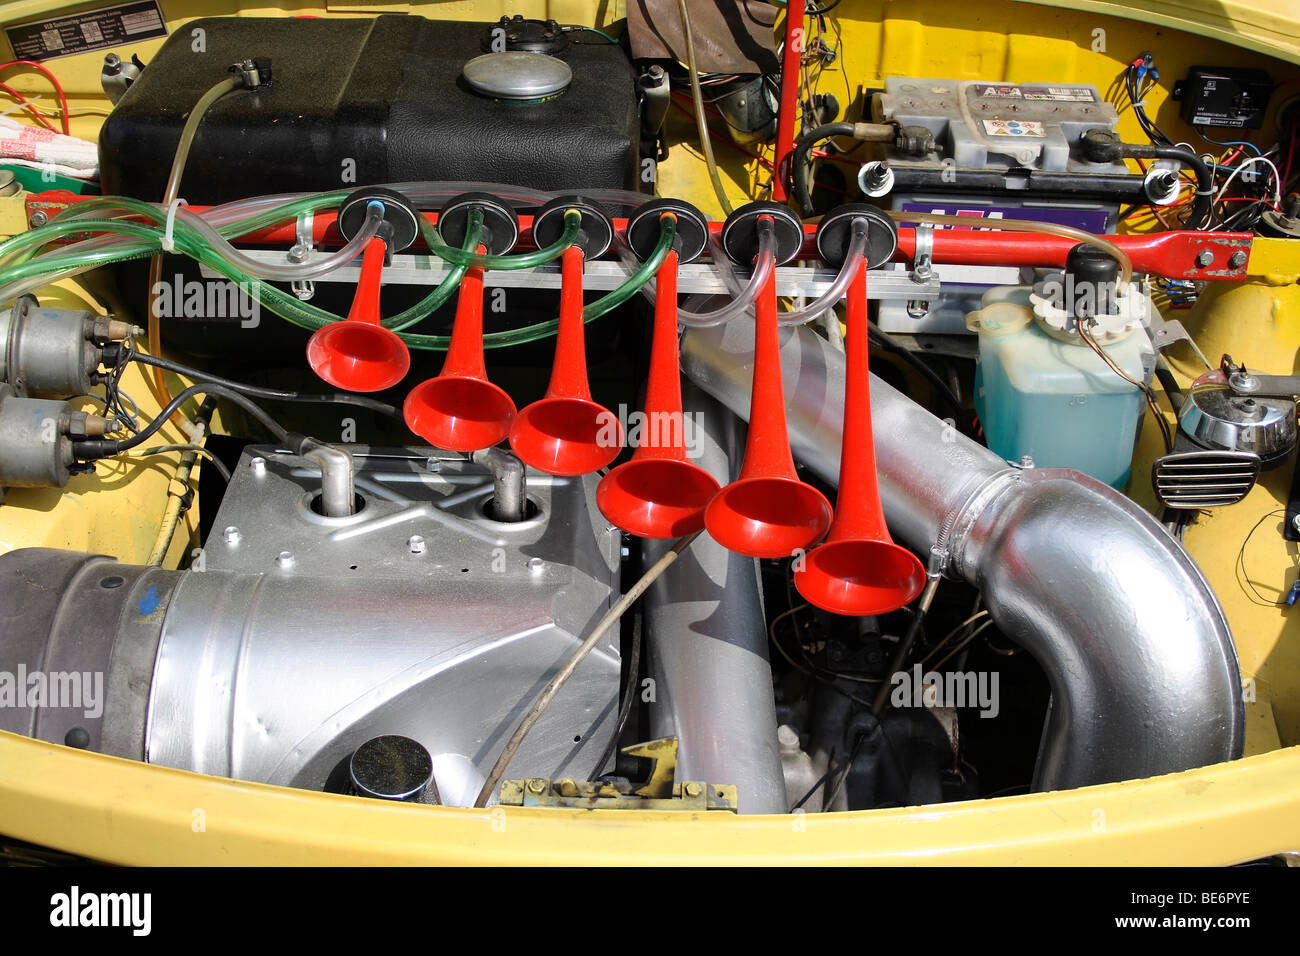 https://c8.alamy.com/comp/BE6PYE/red-fanfare-in-the-engine-compartment-of-a-trabant-car-BE6PYE.jpg